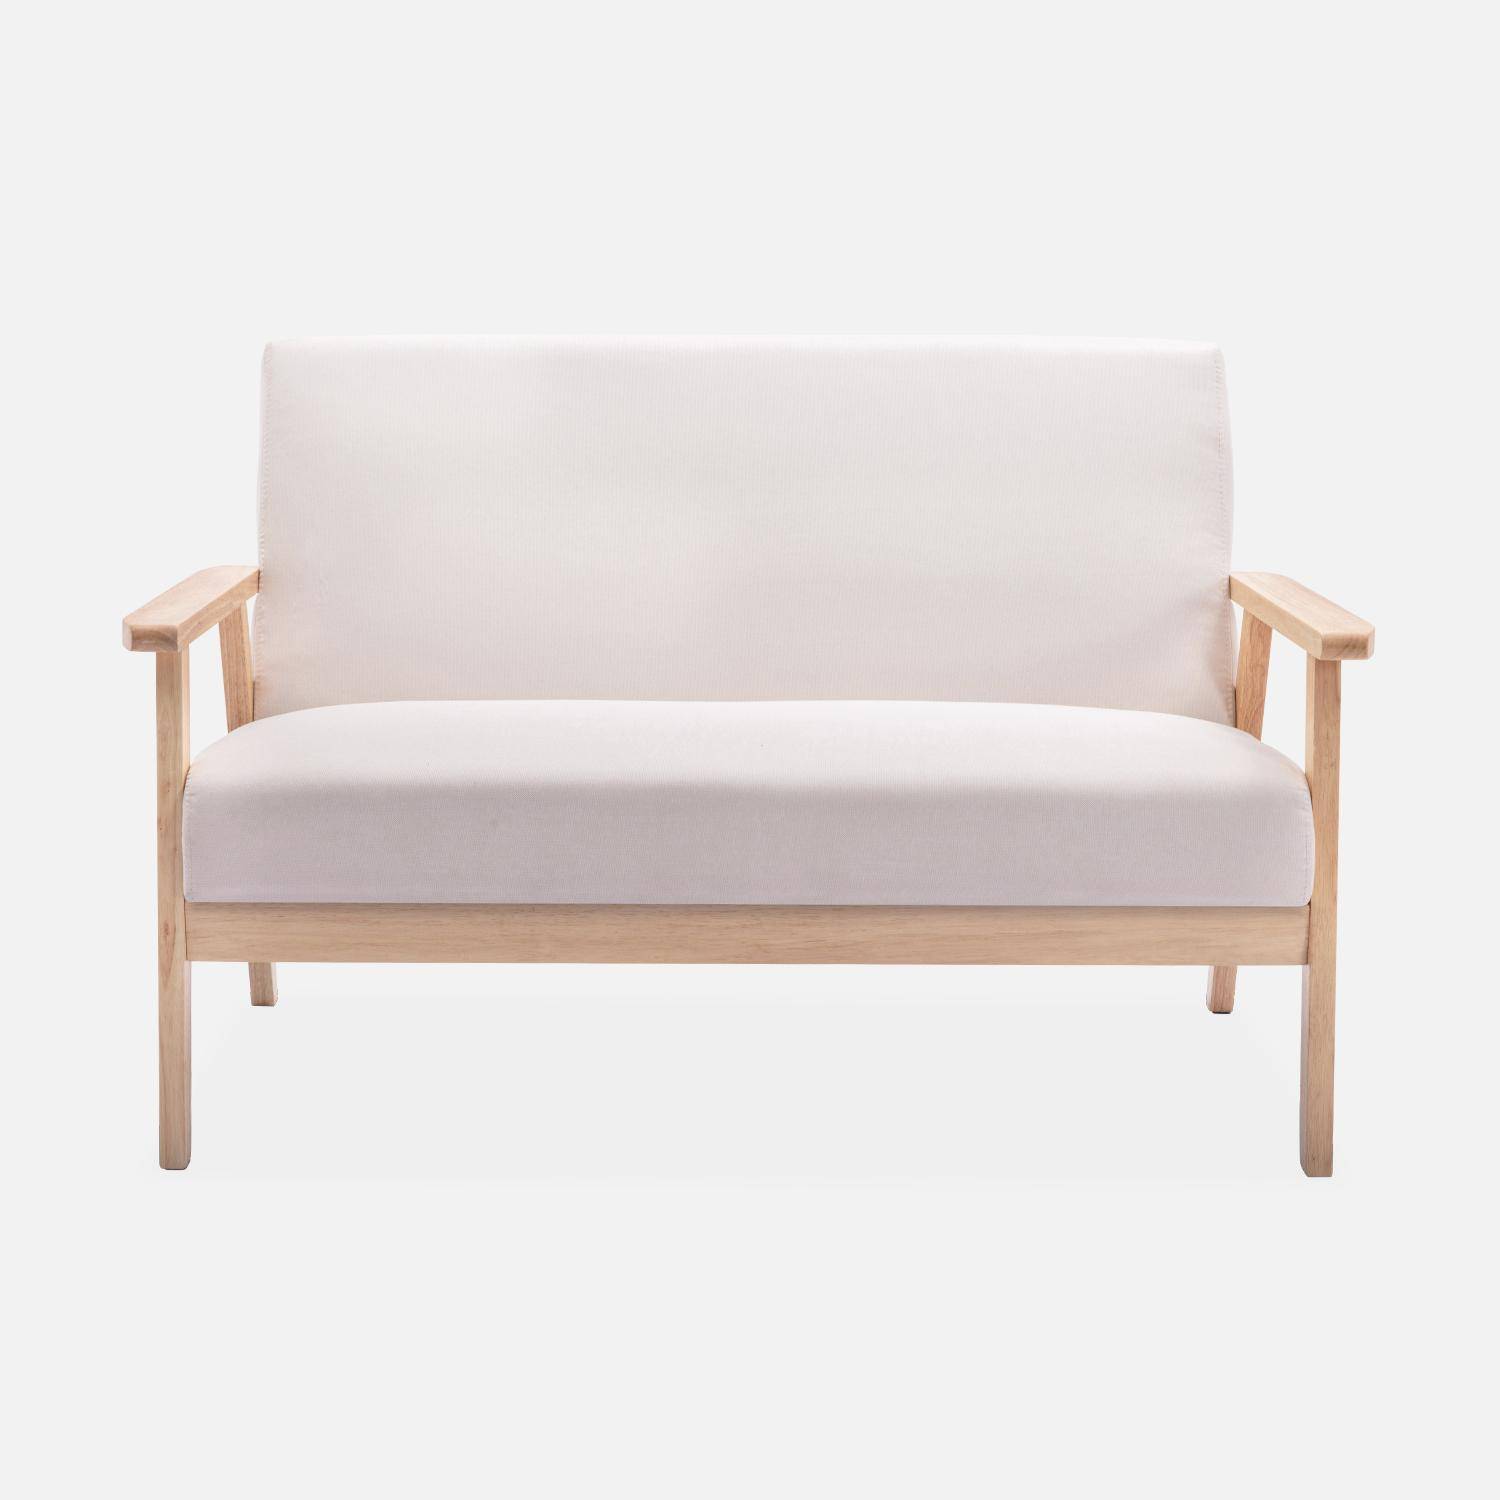 Scandi-style 2-seater sofa and armchair, wood and cream fabric, L114xW69.5xH73cm, Isak Photo4